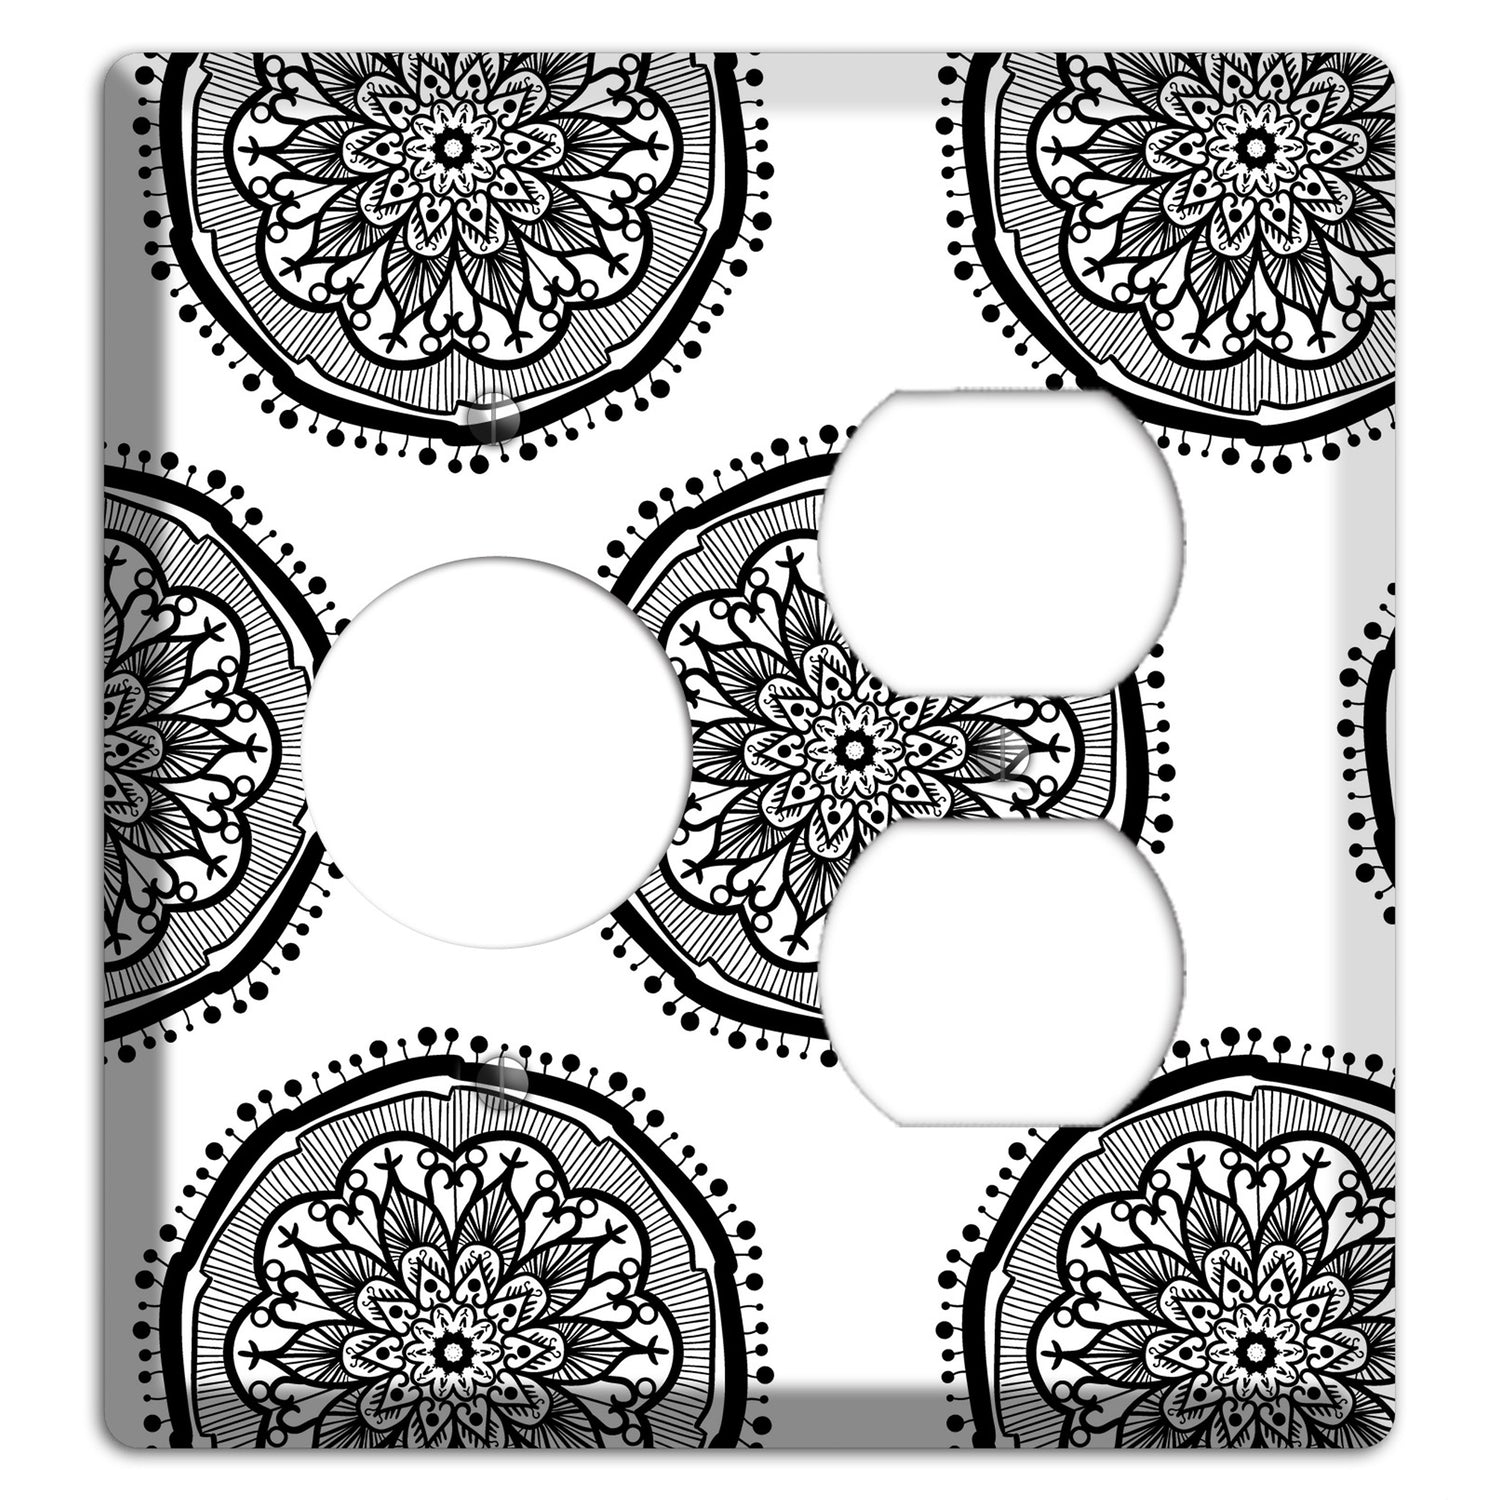 Mandala Black and White Style R Cover Plates Receptacle / Duplex Wallplate